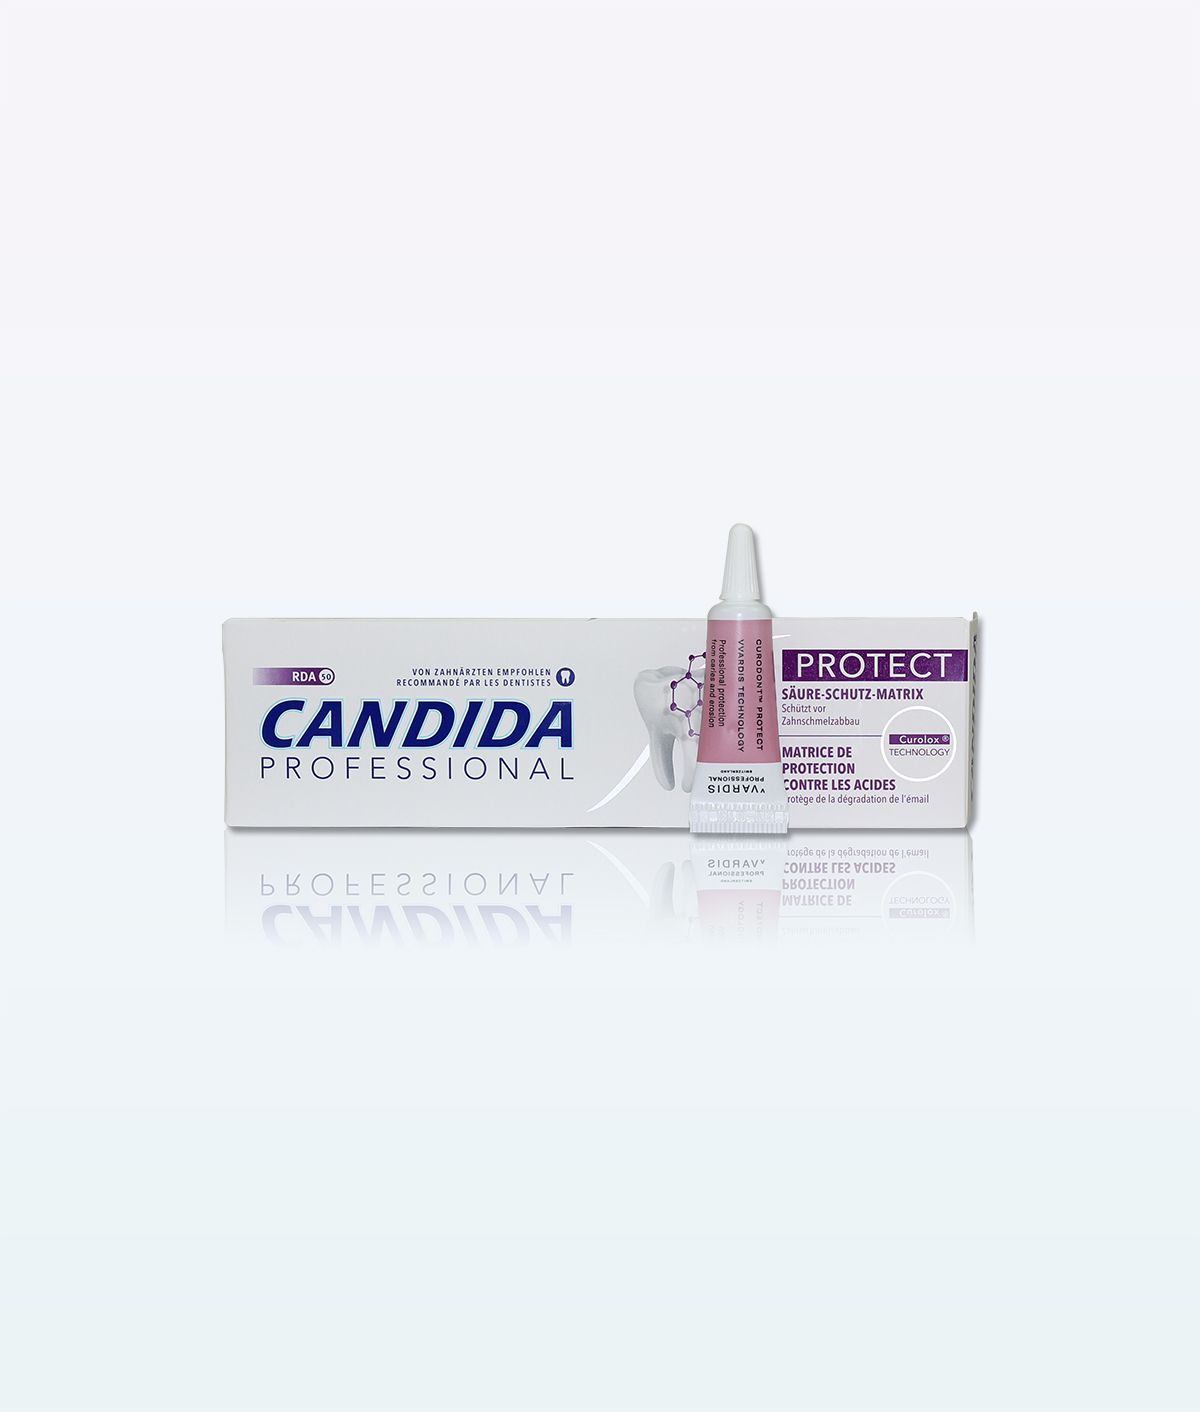 Candida Professionnel Protéger